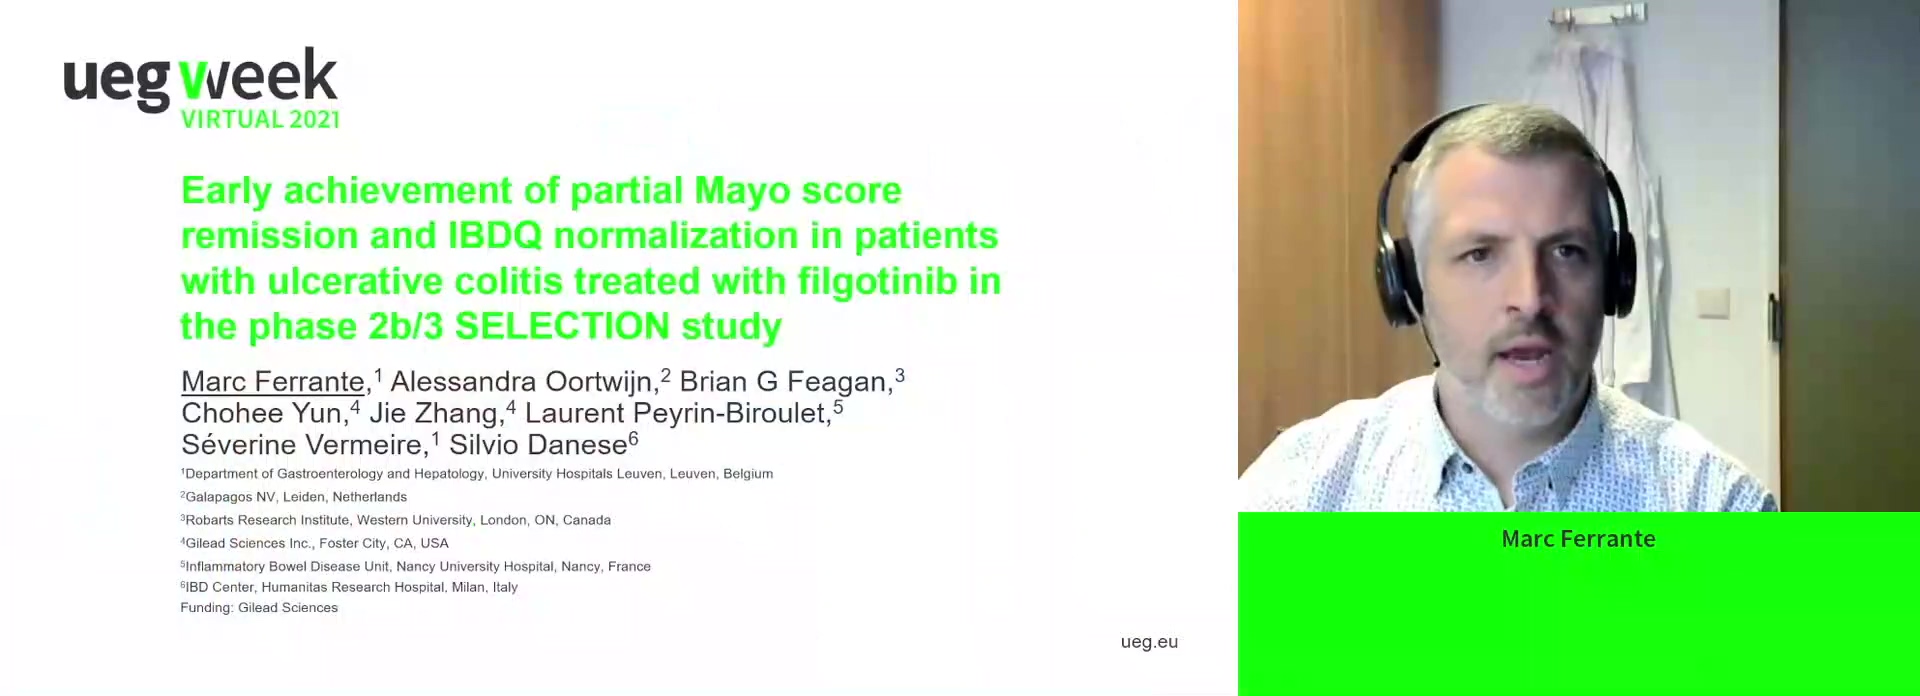 EARLY ACHIEVEMENT OF PARTIAL MAYO SCORE REMISSION AND IBDQ NORMALIZATION IN PATIENTS WITH ULCERATIVE COLITIS TREATED WITH FILGOTINIB IN THE PHASE 2B/3 SELECTION STUDY